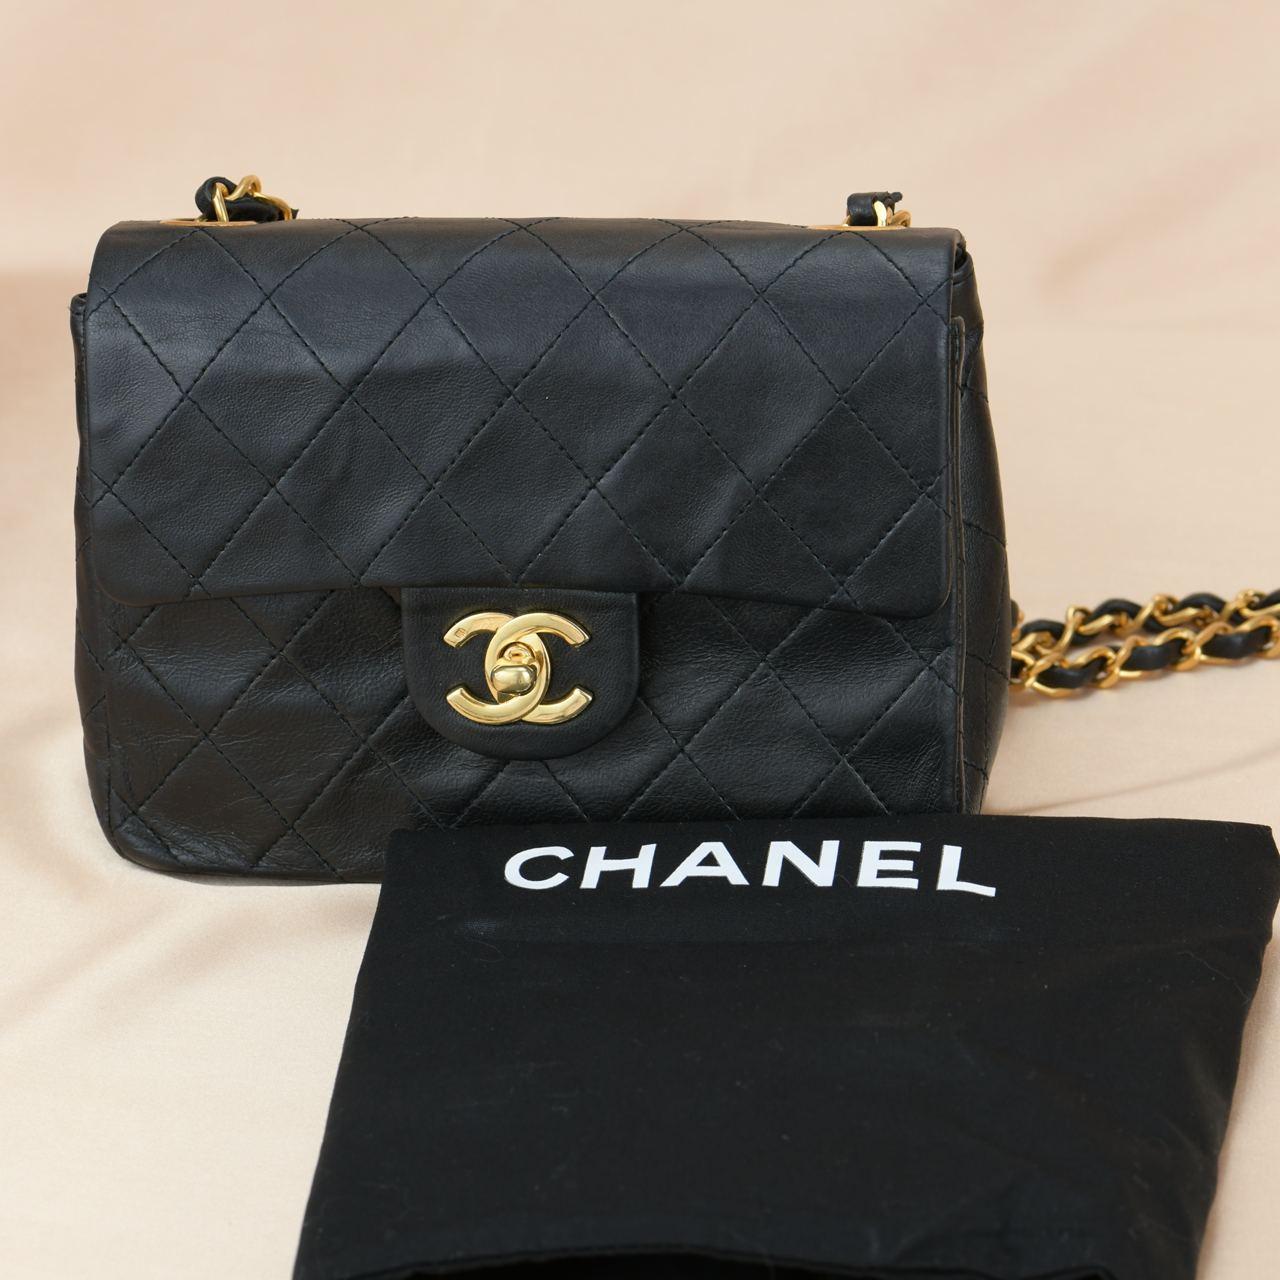 Dandelion Code	AT-1015
Brand	Chanel
Model	Timeless
Serial No.	10******
Colour	Black
Date	Approx. 1990
Metal	Gold
Material	Lambskin
Measurements	Approx. 18 x 13 x 6.5 cm
Condition	Good 
Comes with	Chanel Dust bag and authentic Card

Every piece